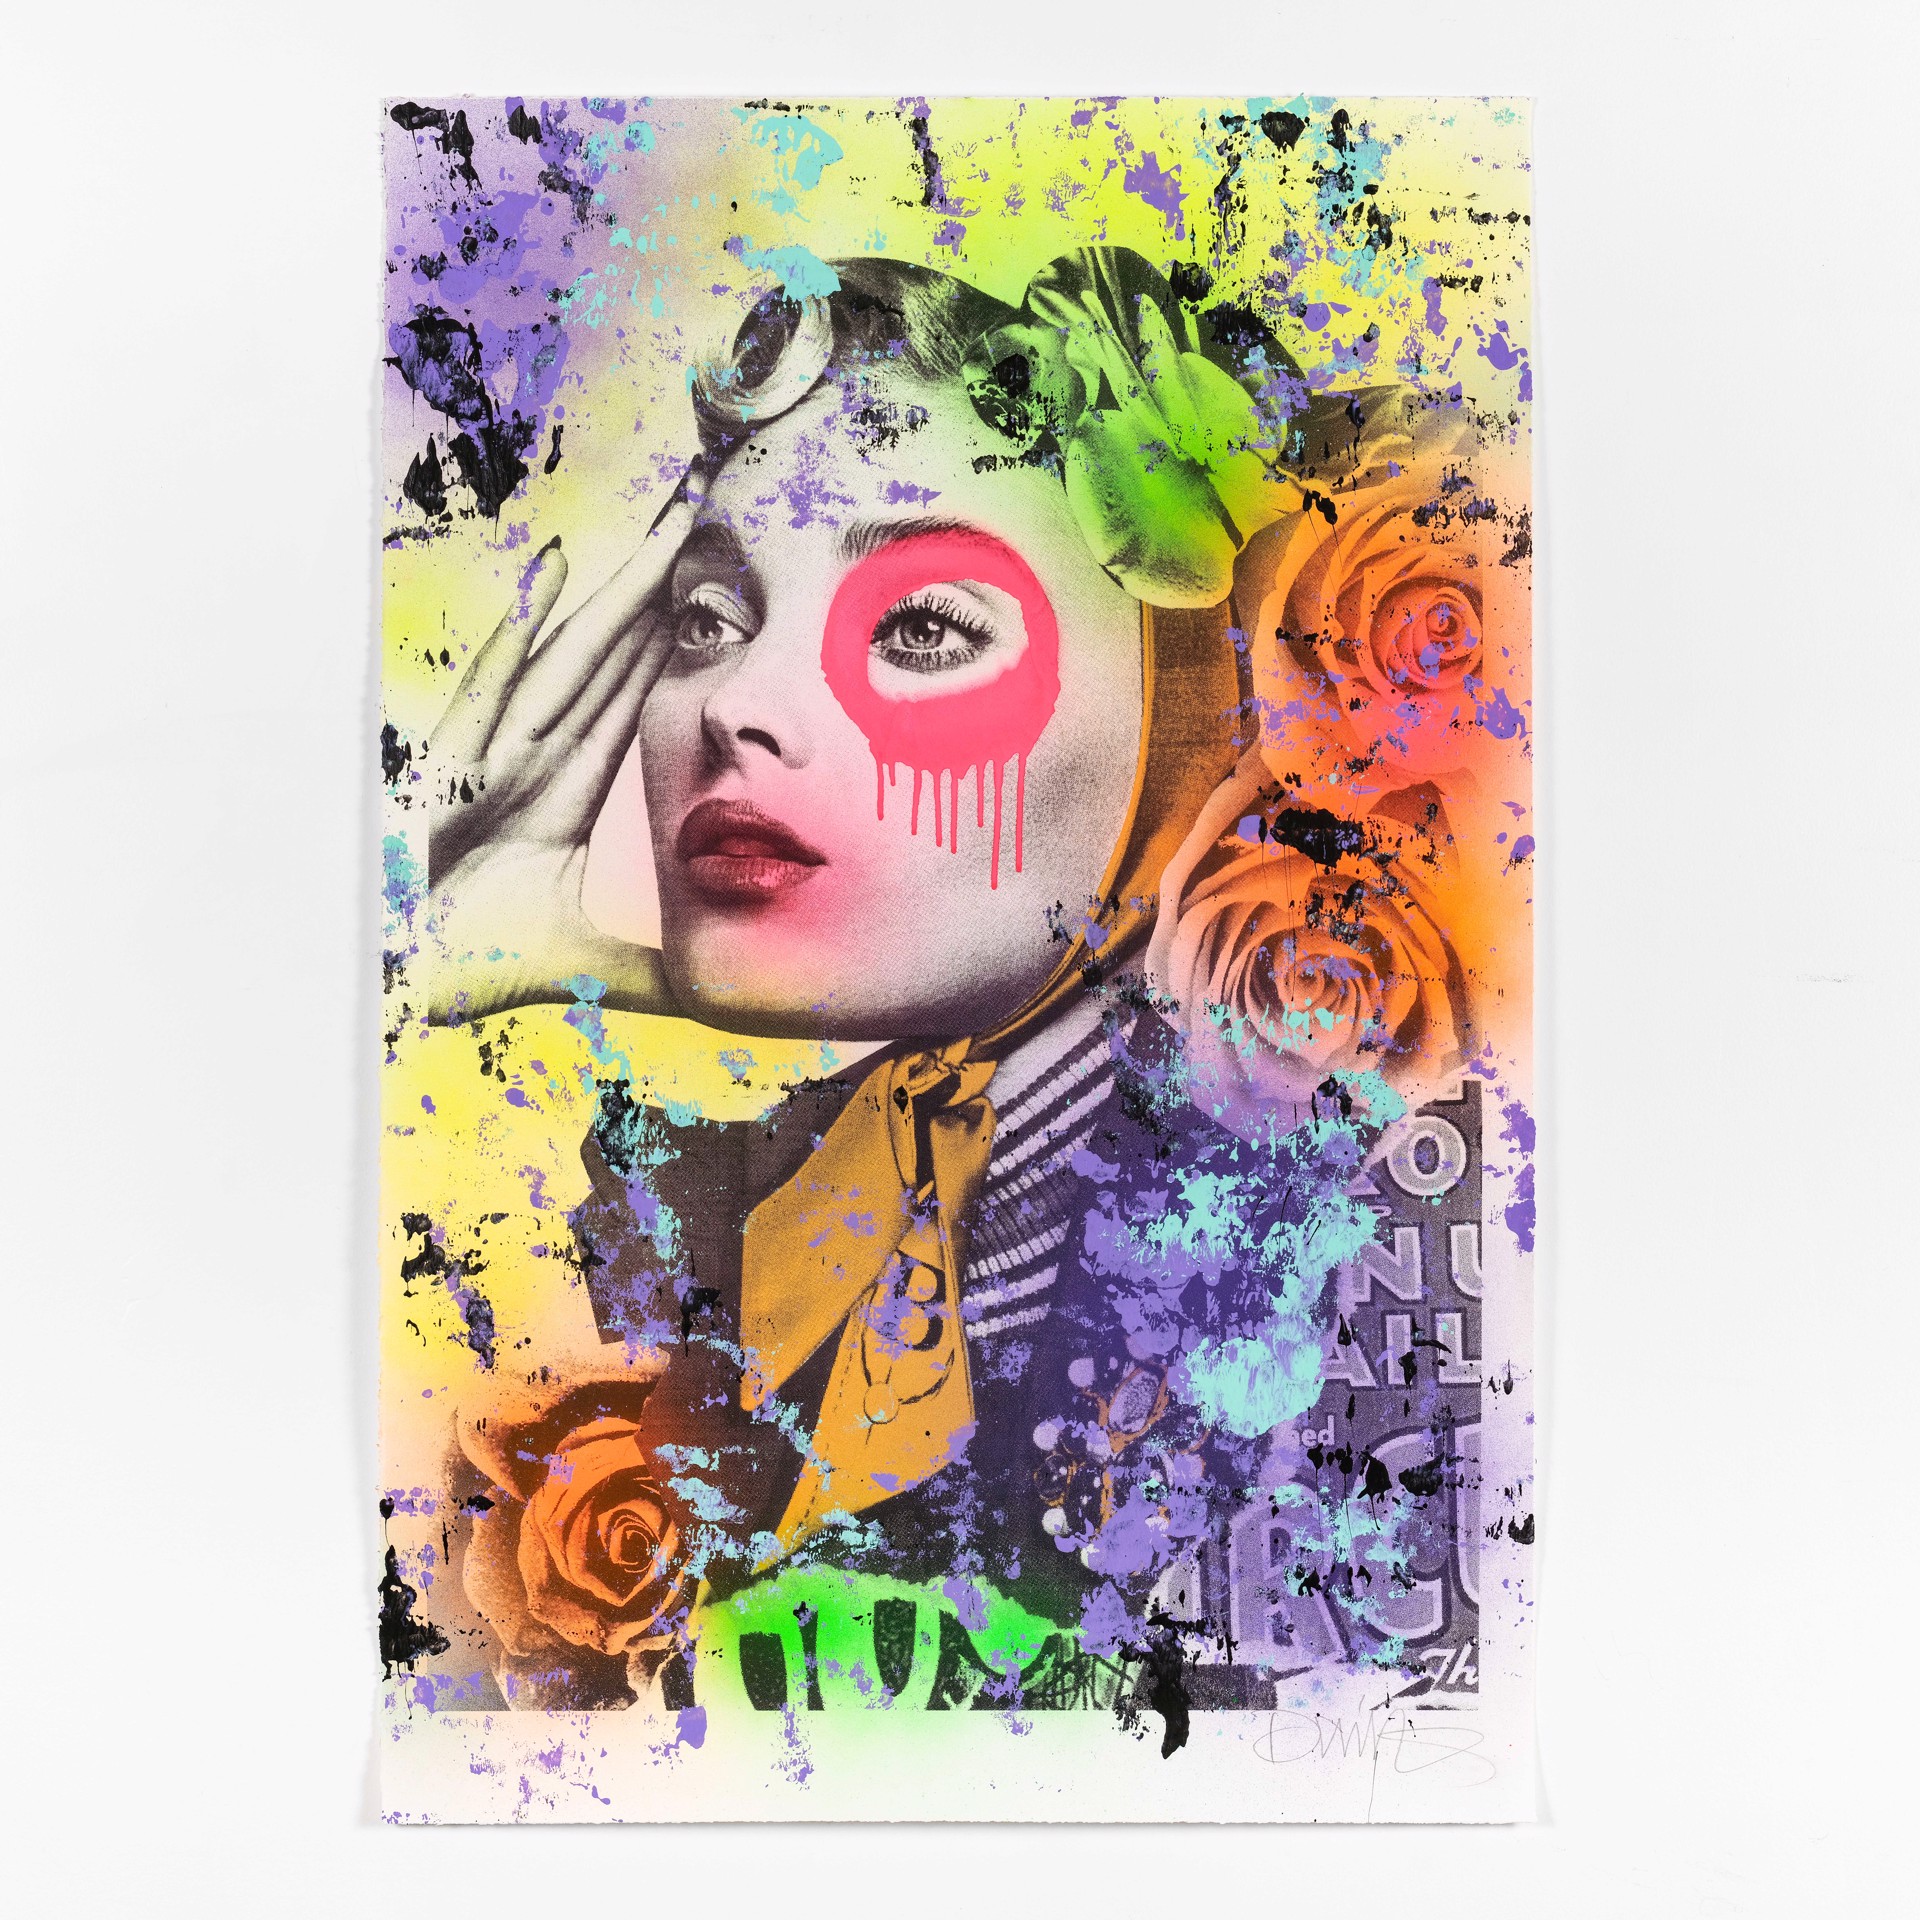 Untitled 1 by DAIN